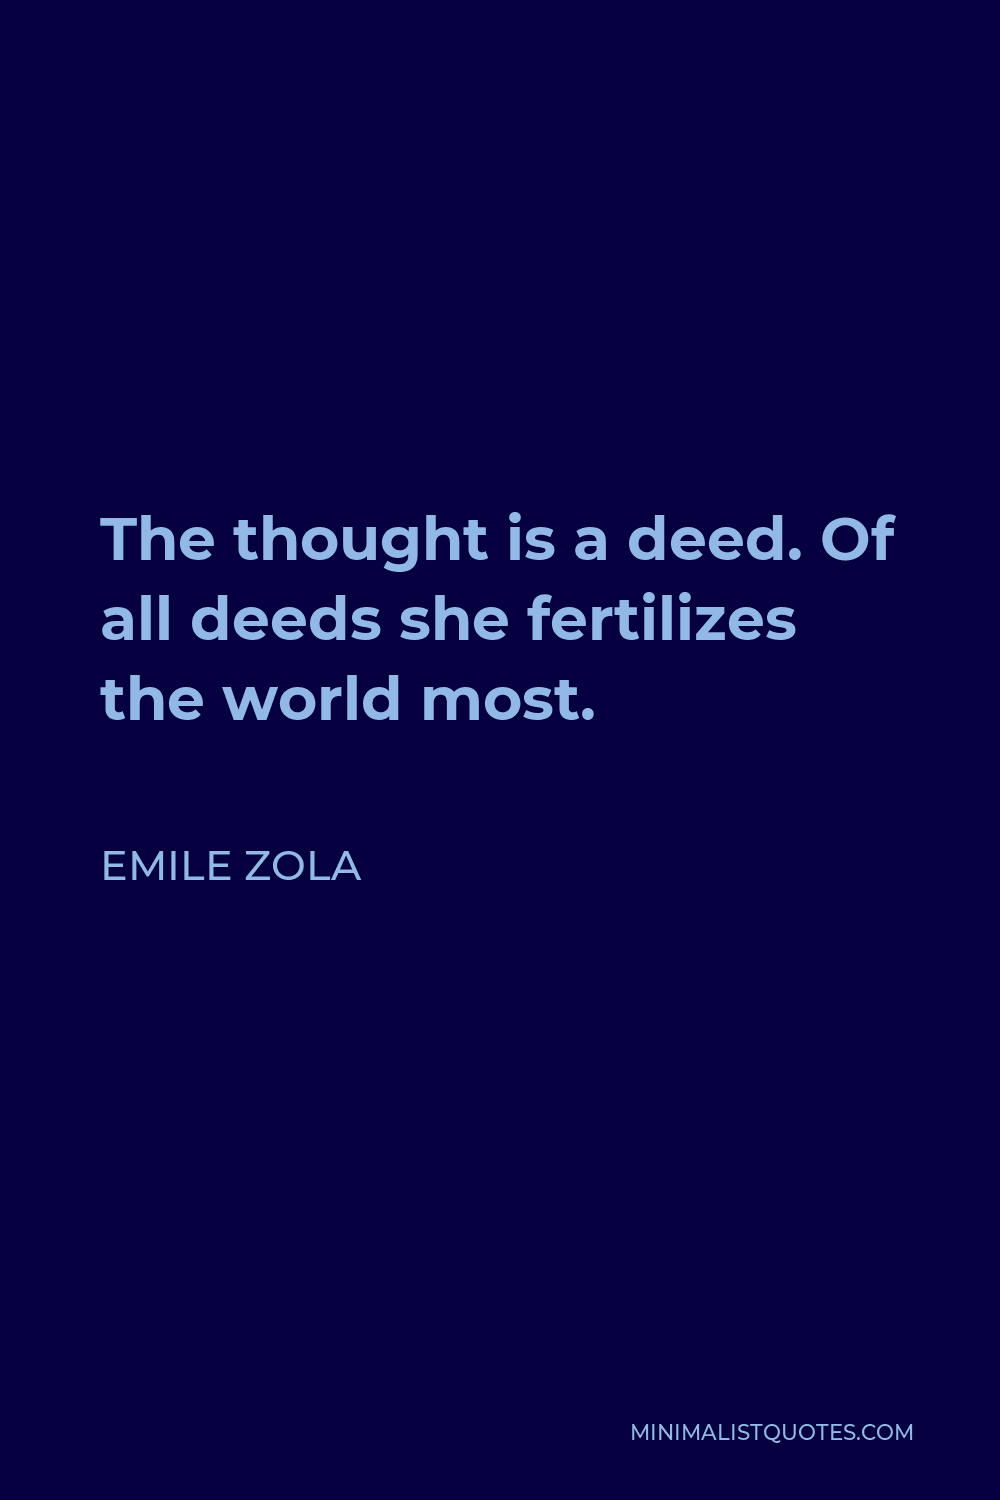 Emile Zola Quote - The thought is a deed. Of all deeds she fertilizes the world most.